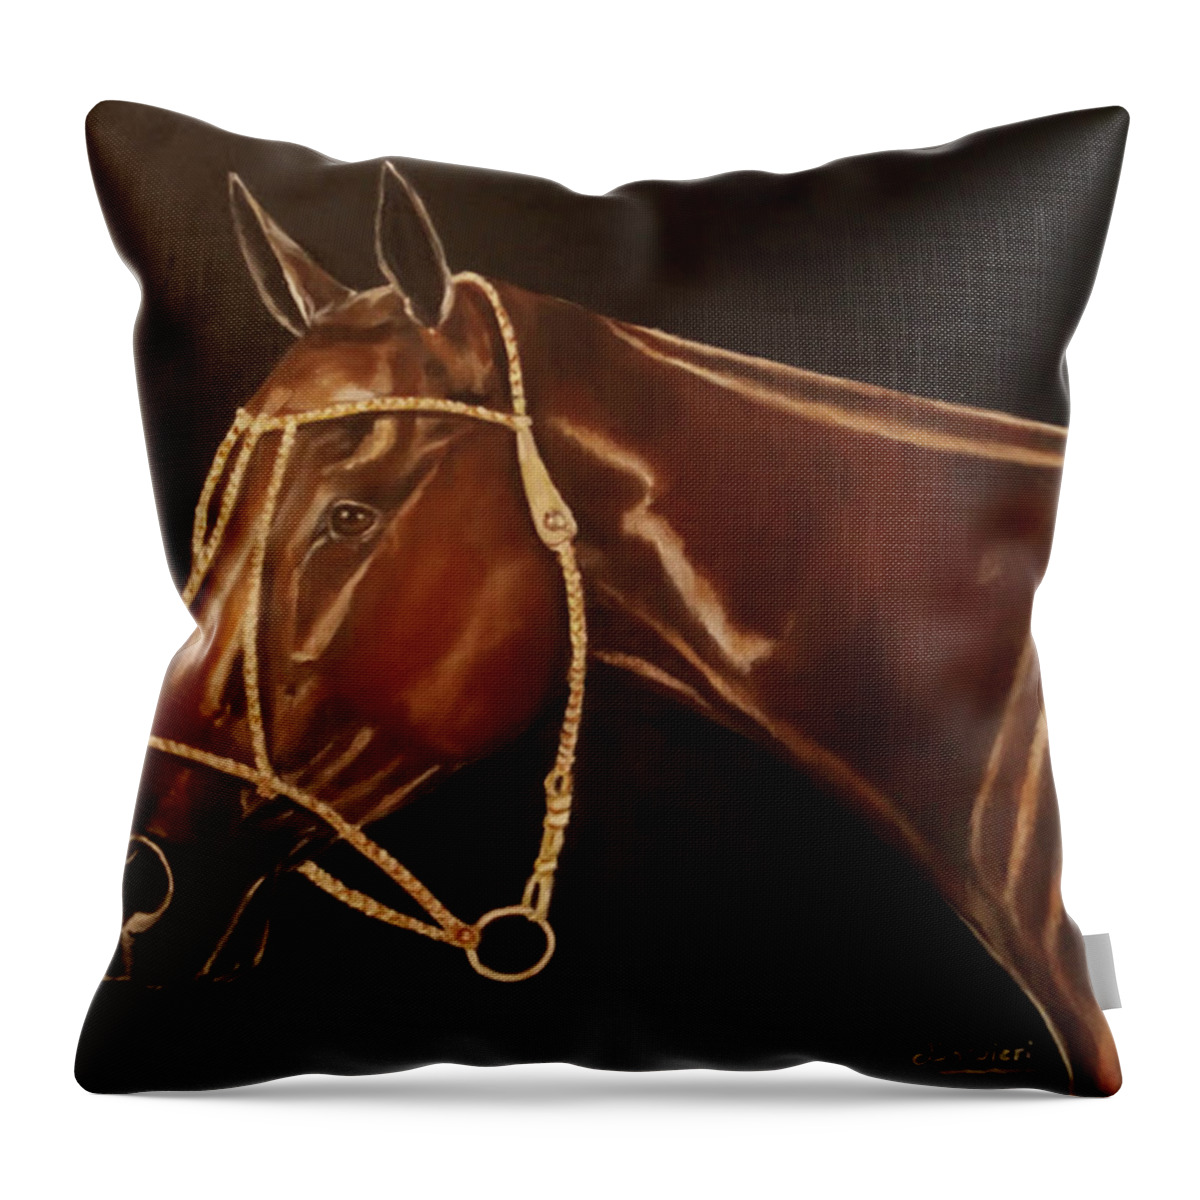 Wallpaint Throw Pillow featuring the painting Retrato by Carlos Jose Barbieri